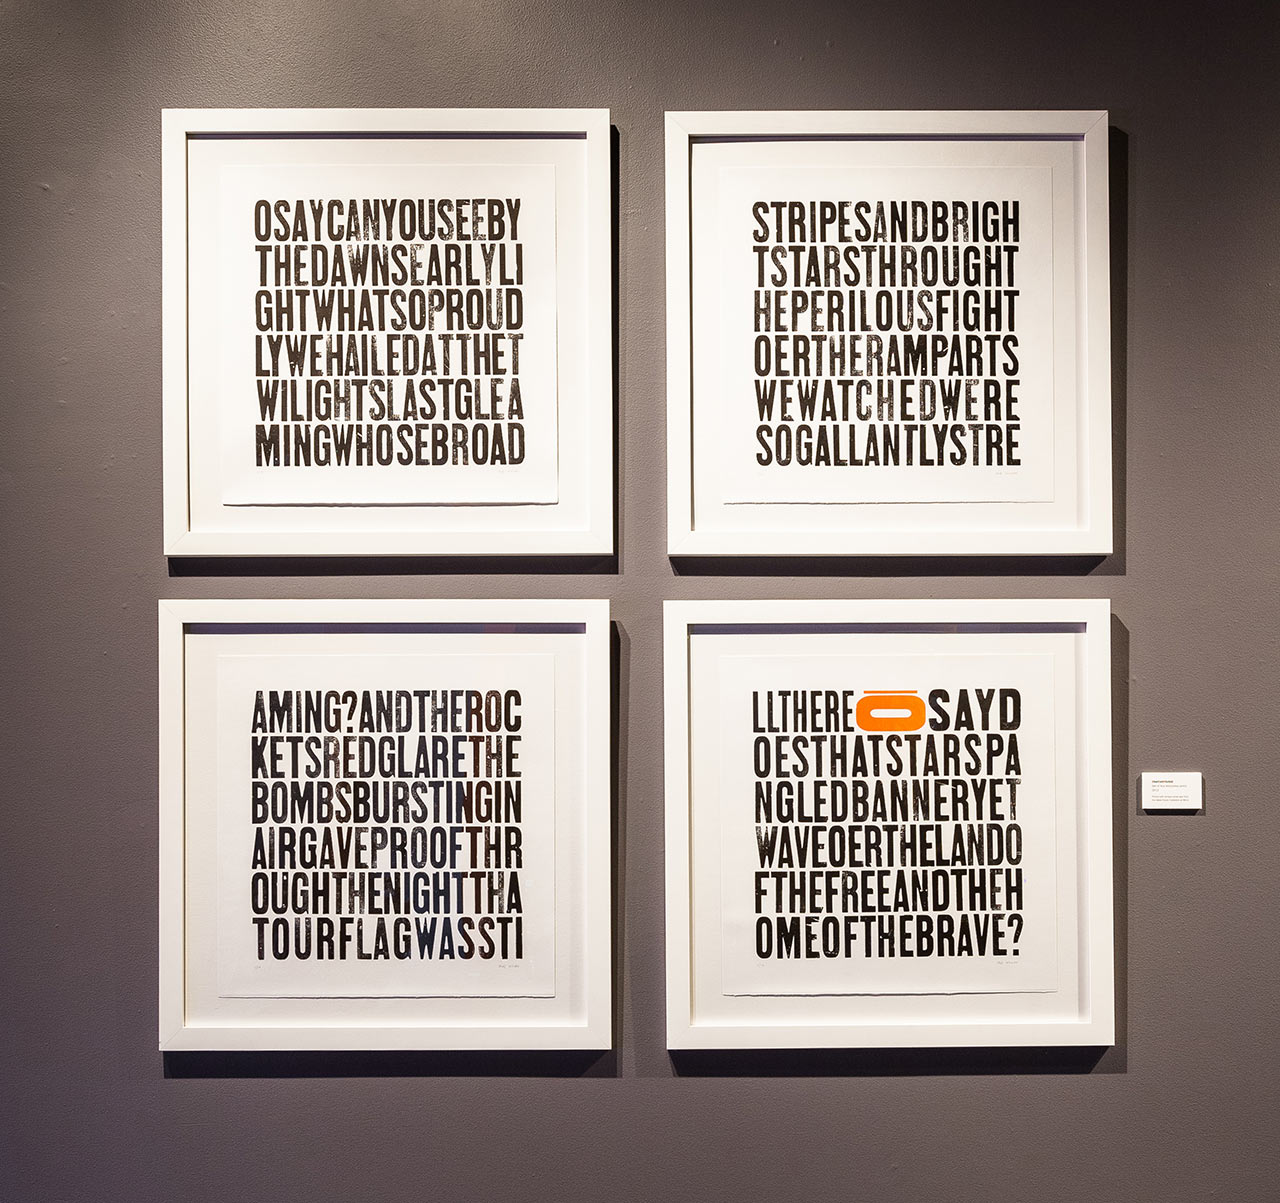 OSAYCANYOUSEE. Set of four framed letterpress prints. Wood type print of the Star Spangled Banner lyrics with all of the letters run together into seamless pattern that rearranges the original words and meanings